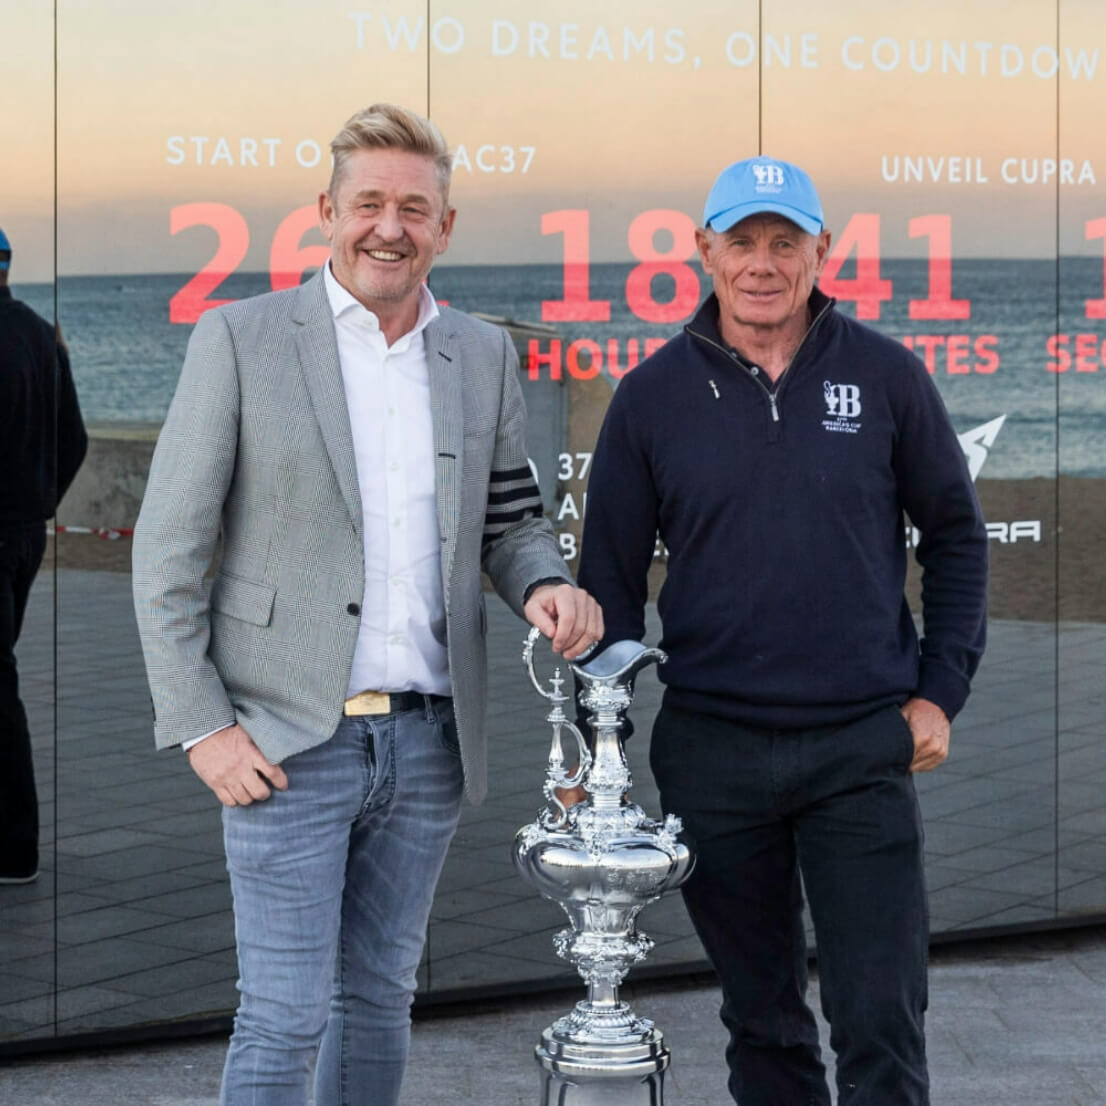 CUPRA and the America’s Cup join forces